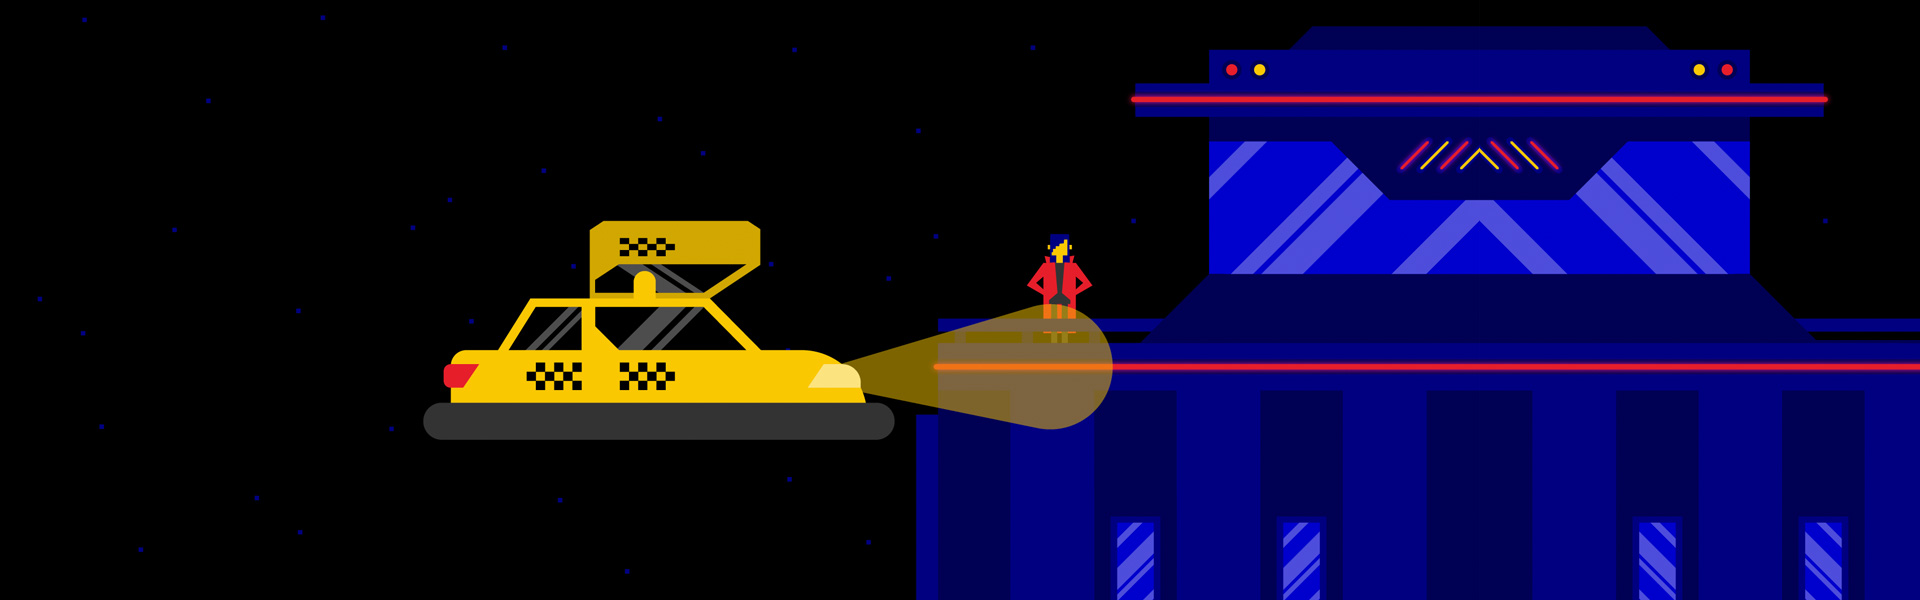 8-bit computer graphics of futuristic city-scape with a flying taxi in the foreground